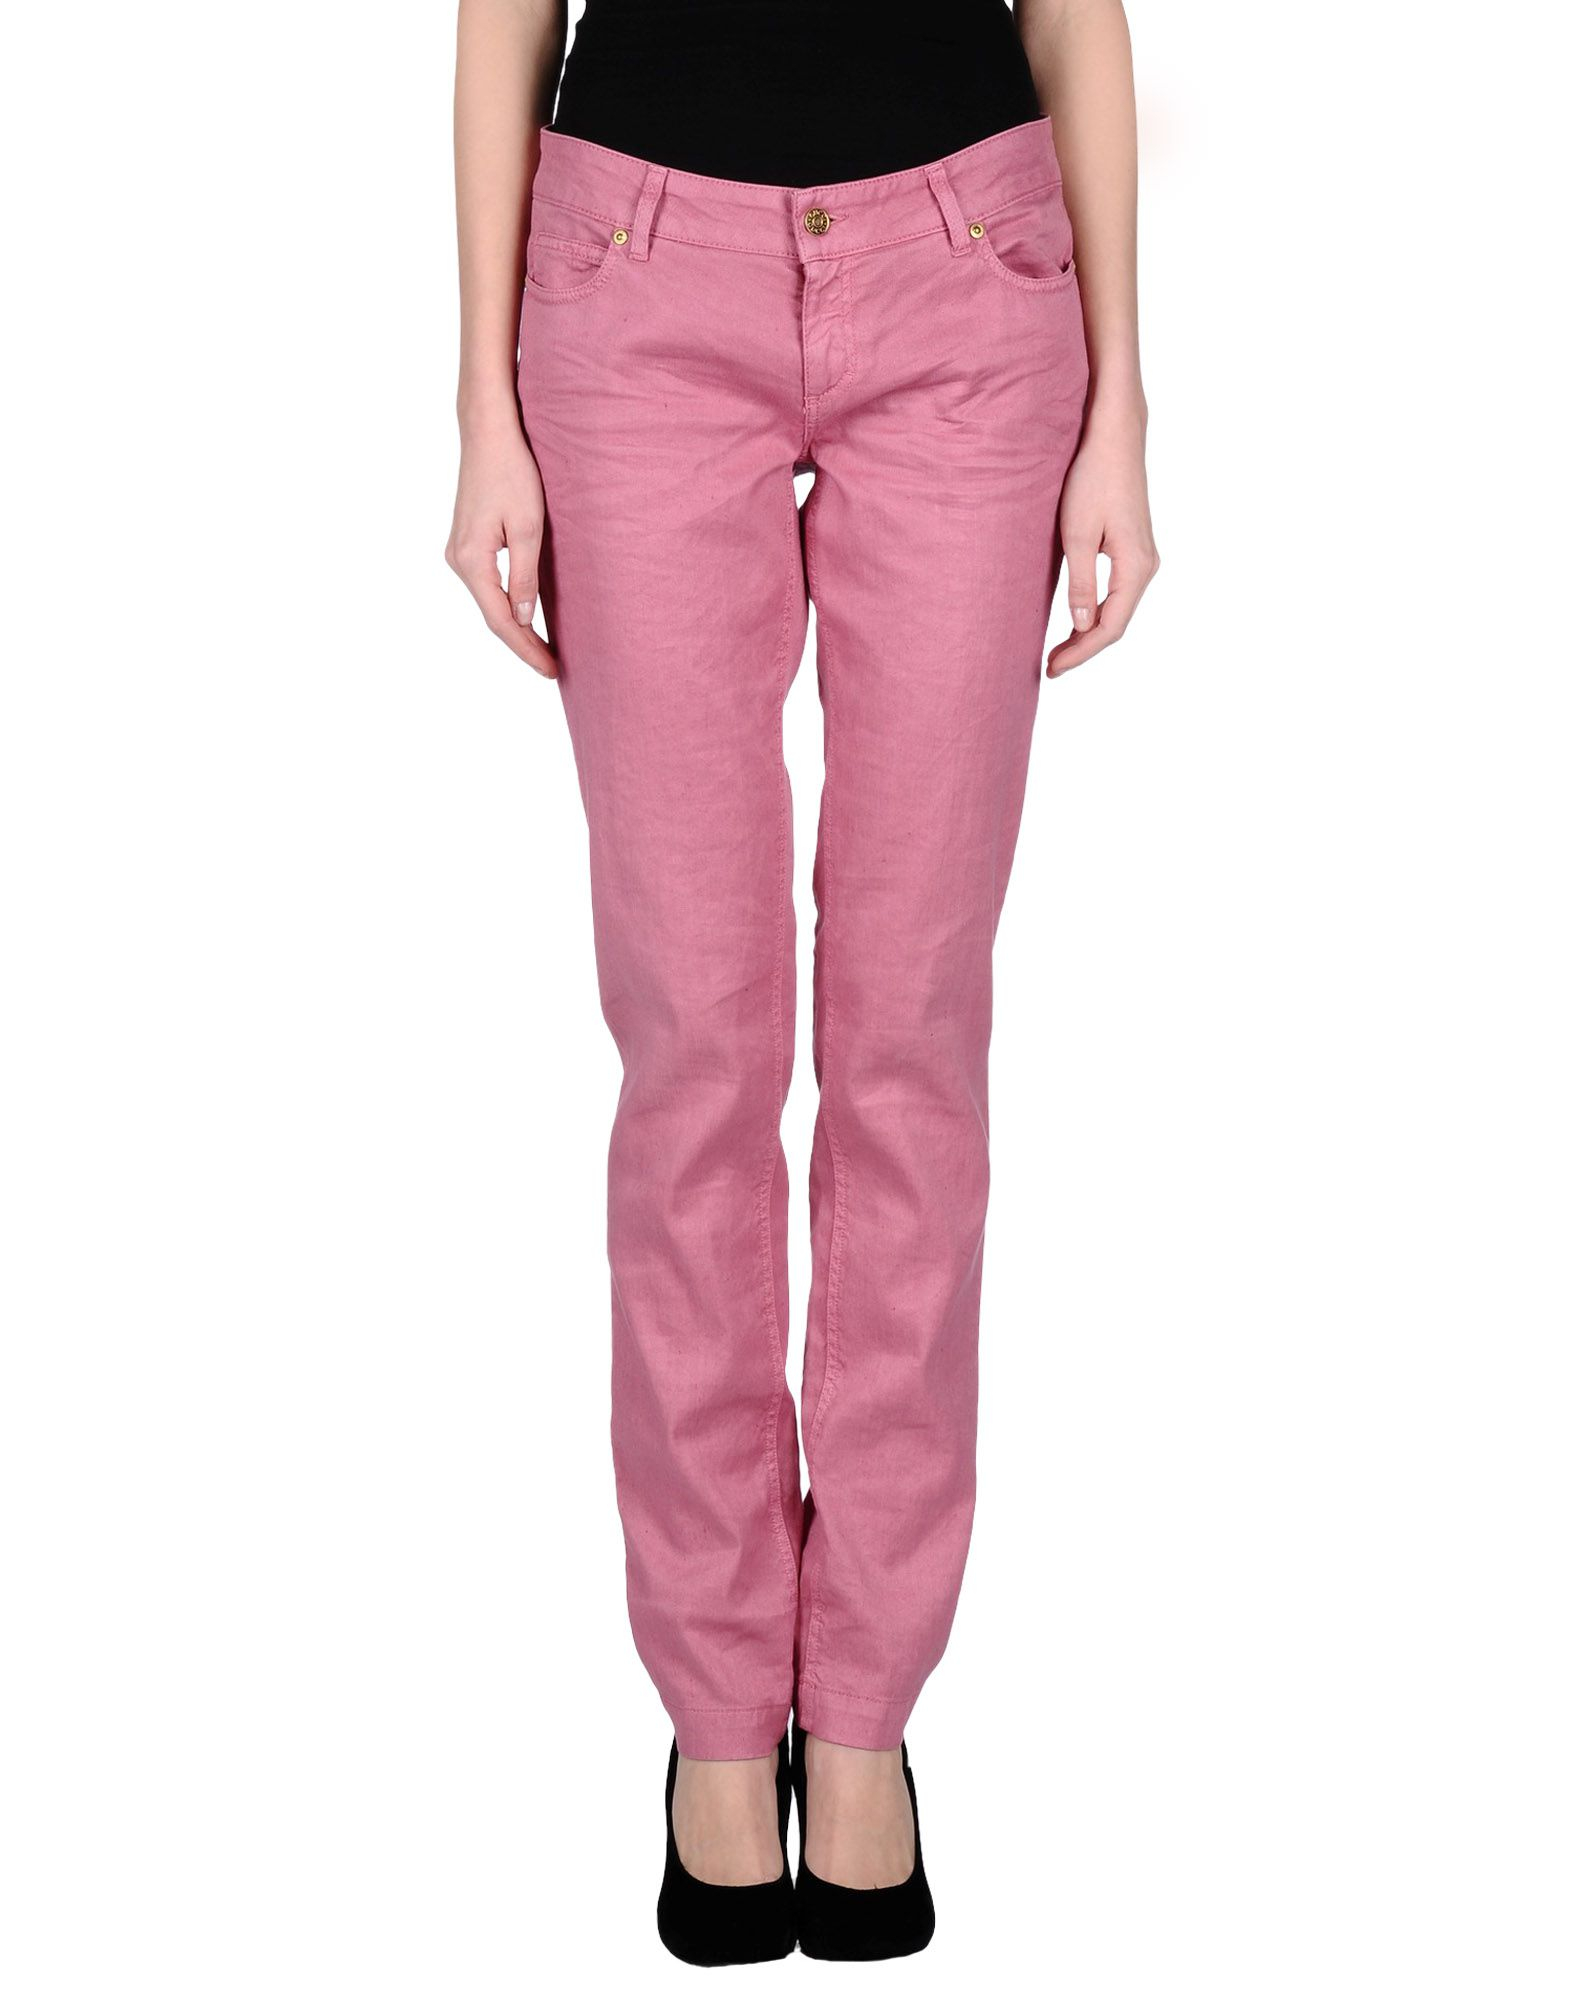 Gucci Denim Trousers in Pink (Pastel pink) | Lyst